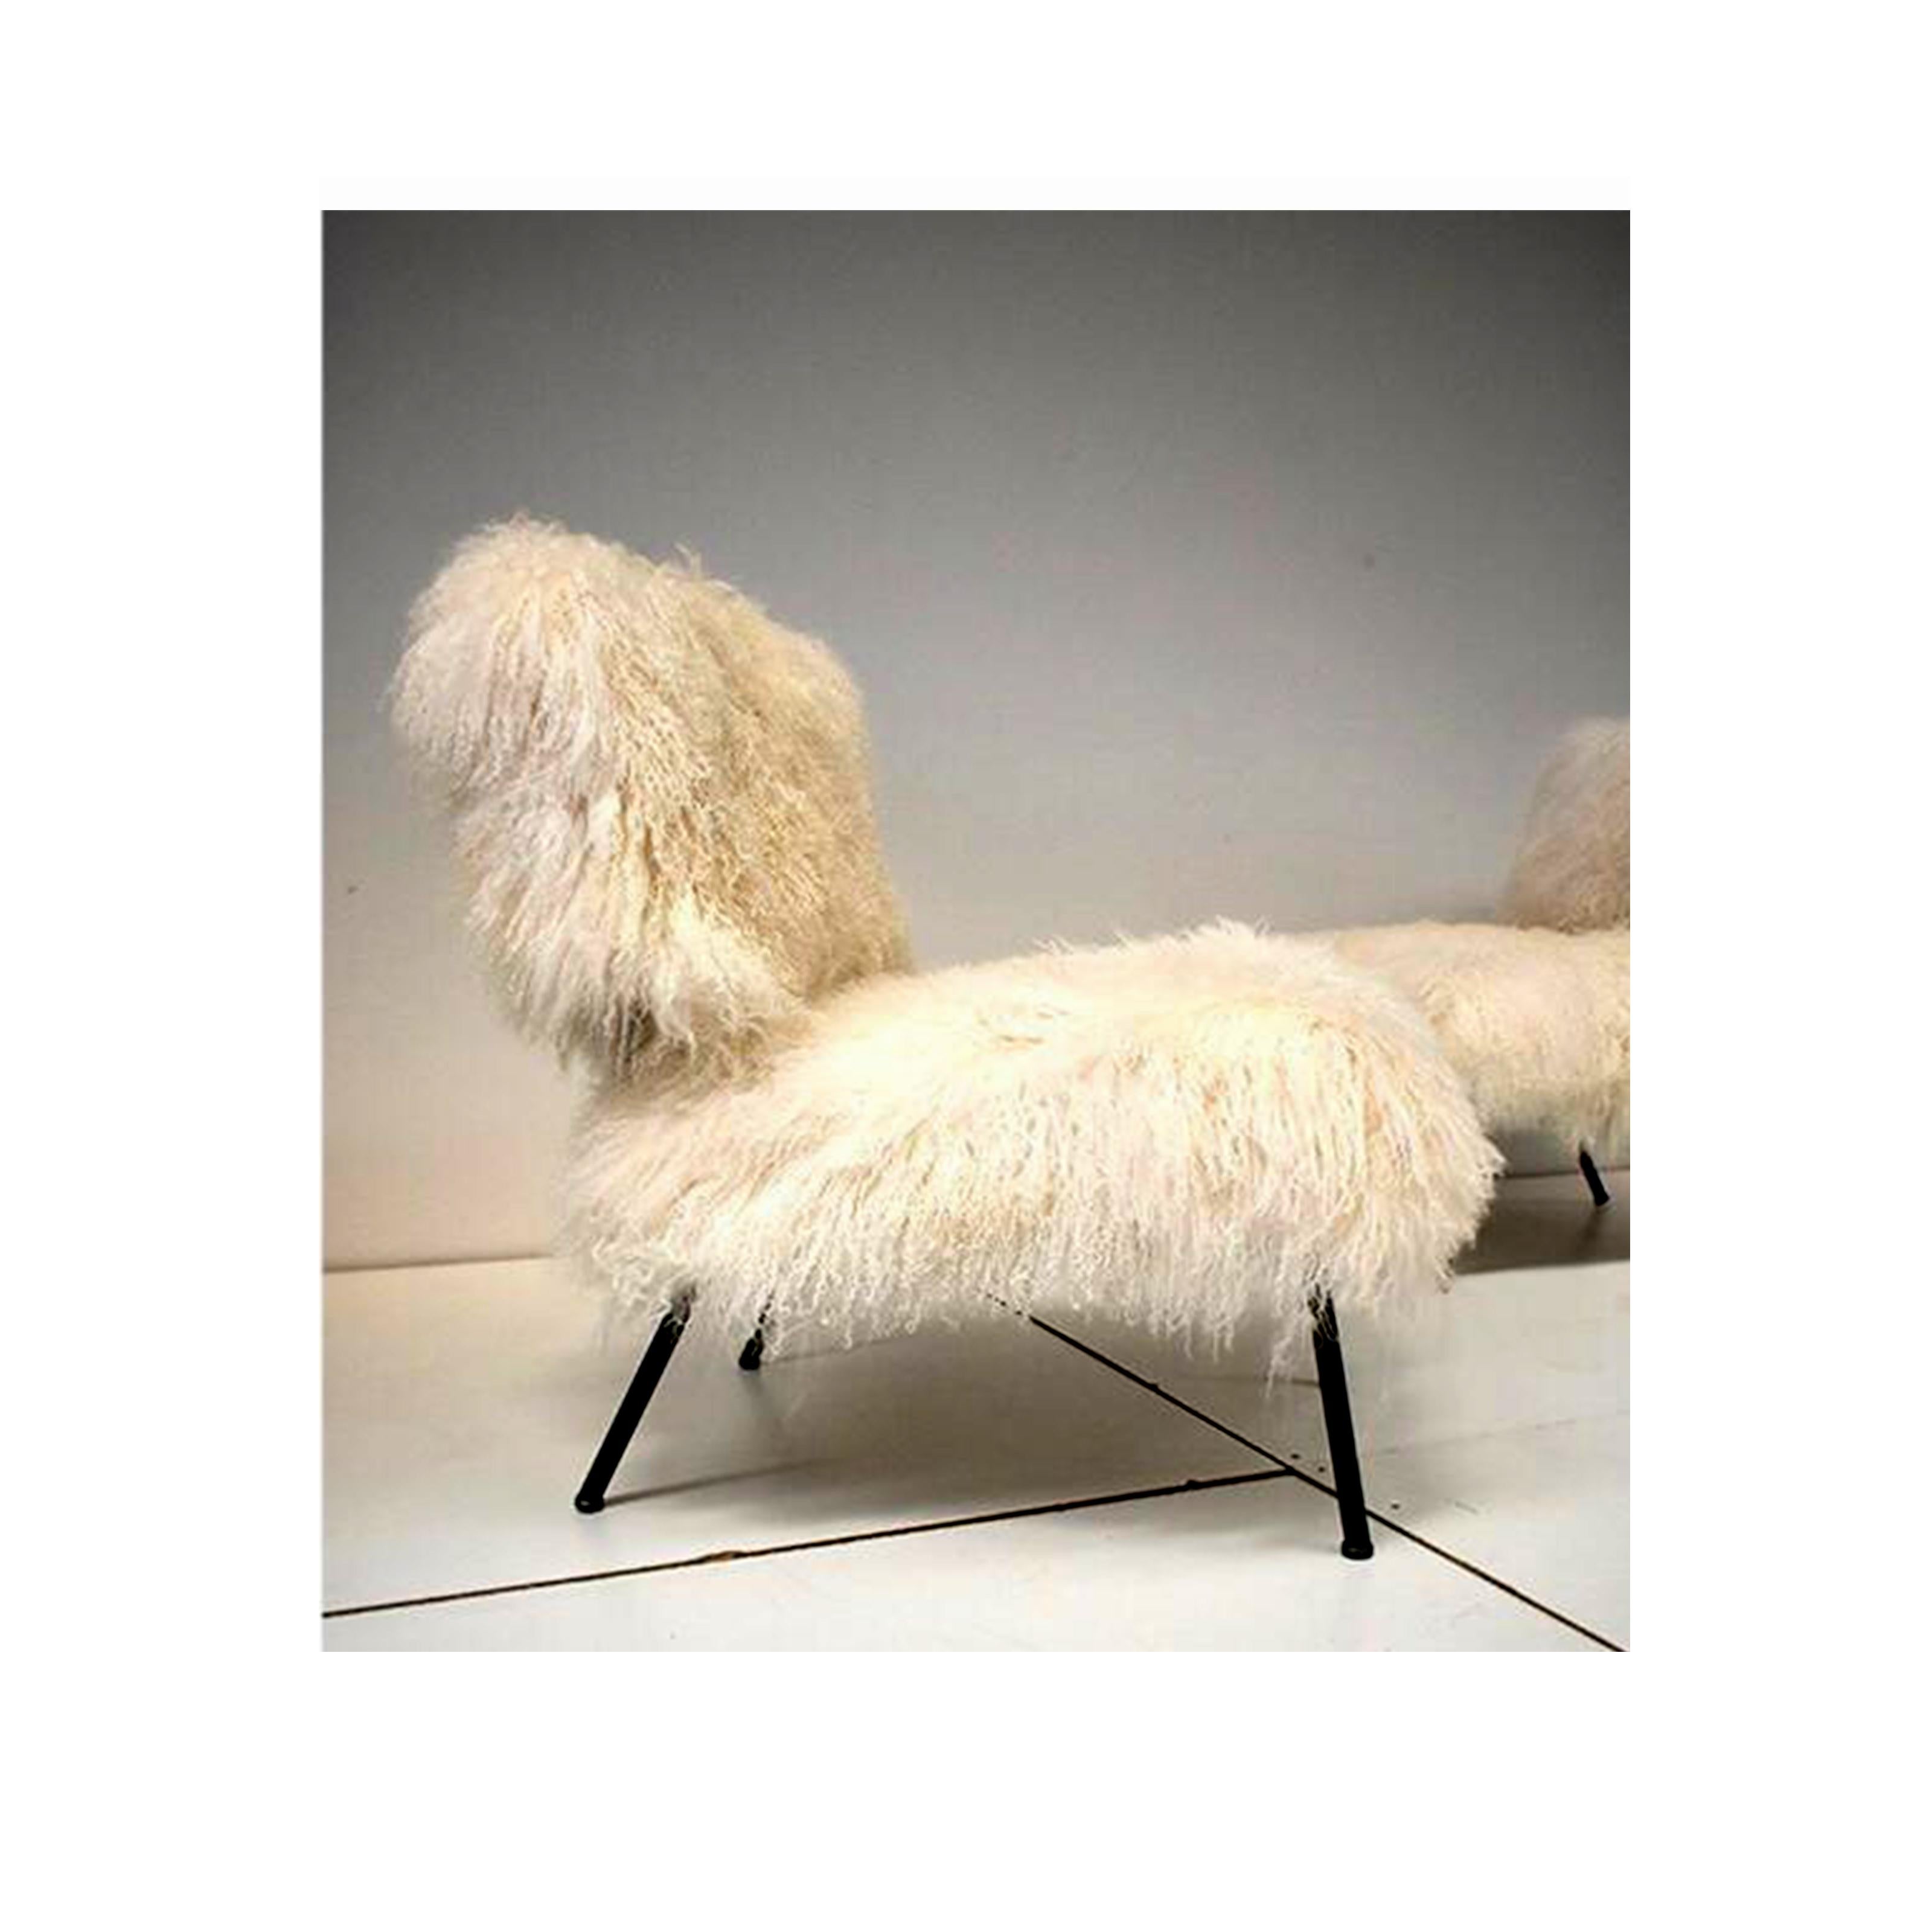 Vintage armchair from the 1970s, Italian manufacture.
The armchairs have an iron paw with seat and back upholstered in Mongolian goat fur.